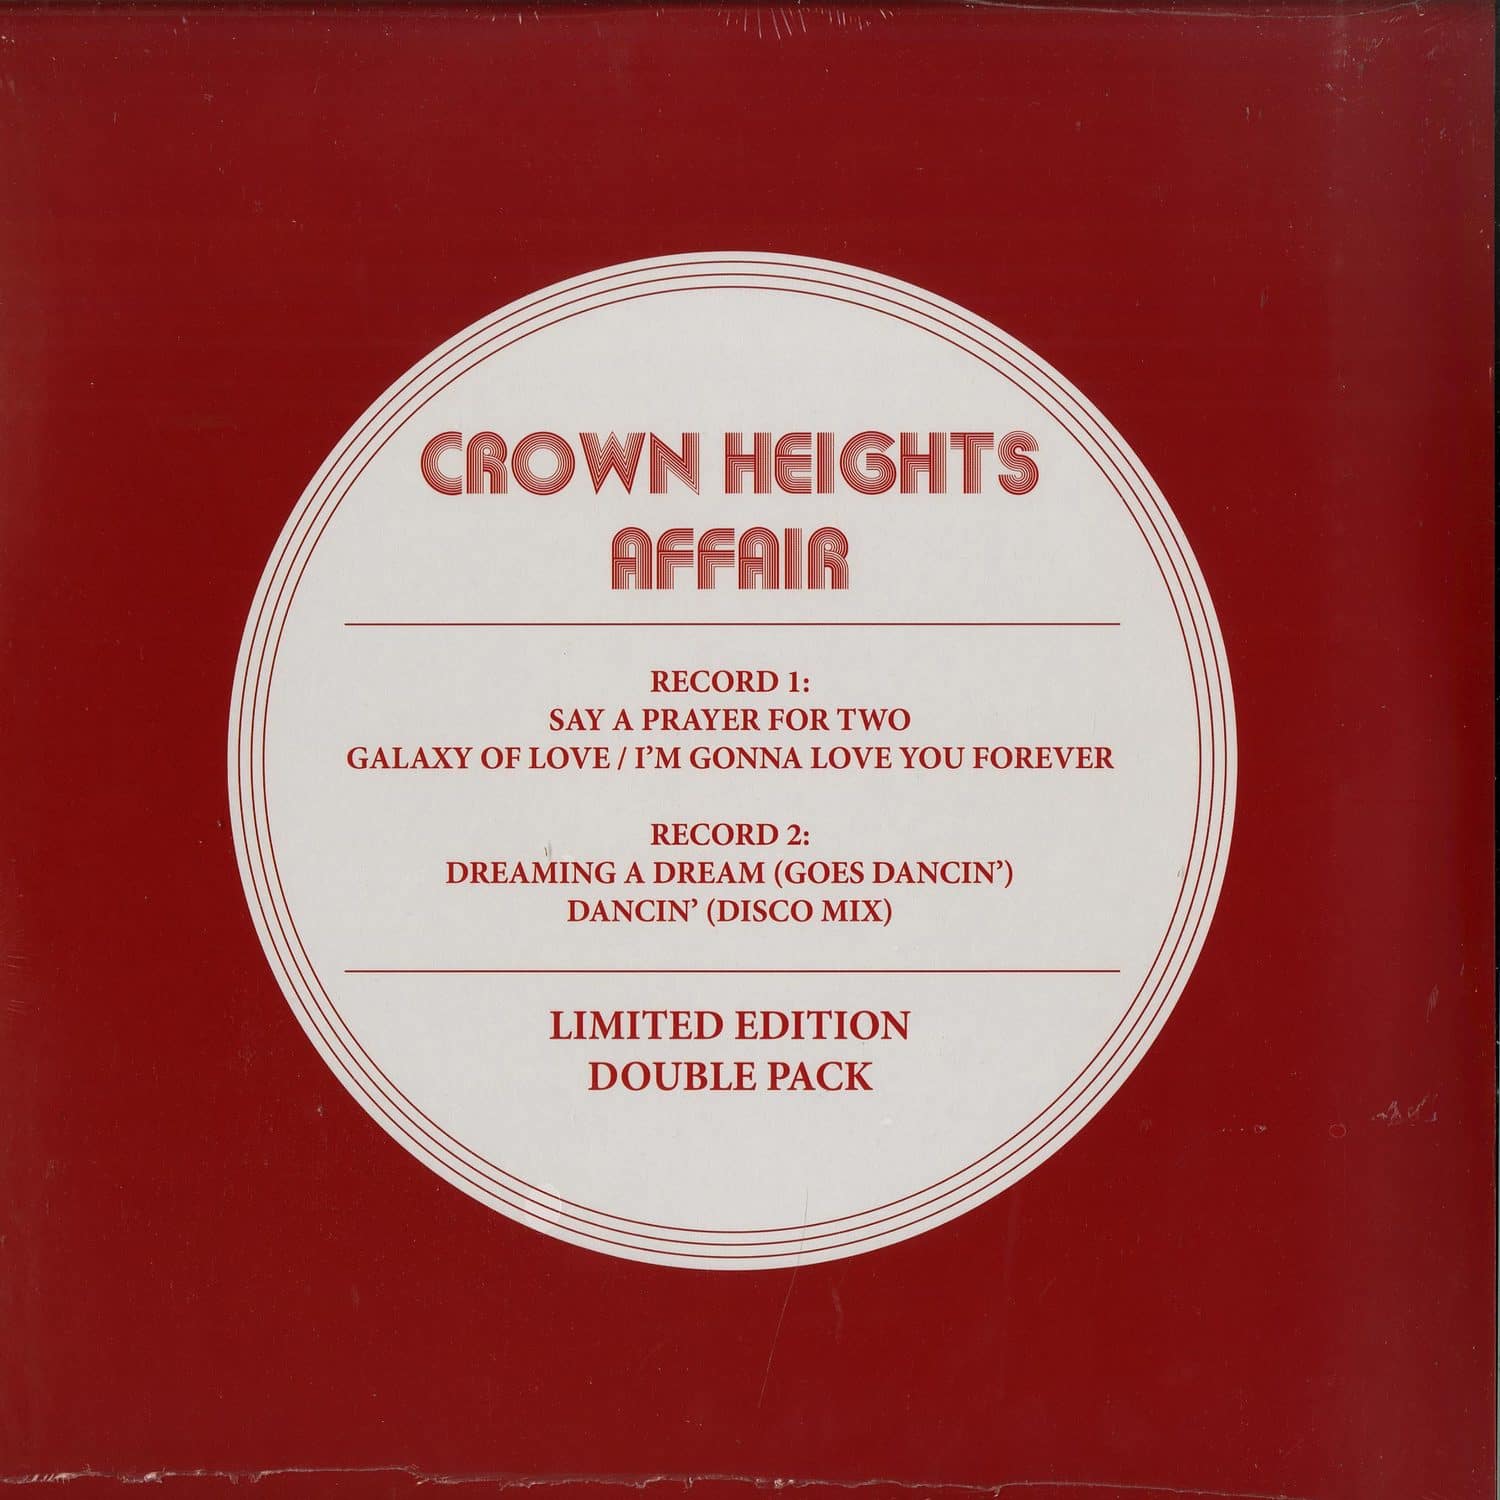 Crown Heights Affair - LIMITED EDITION DOUBLE PACK 